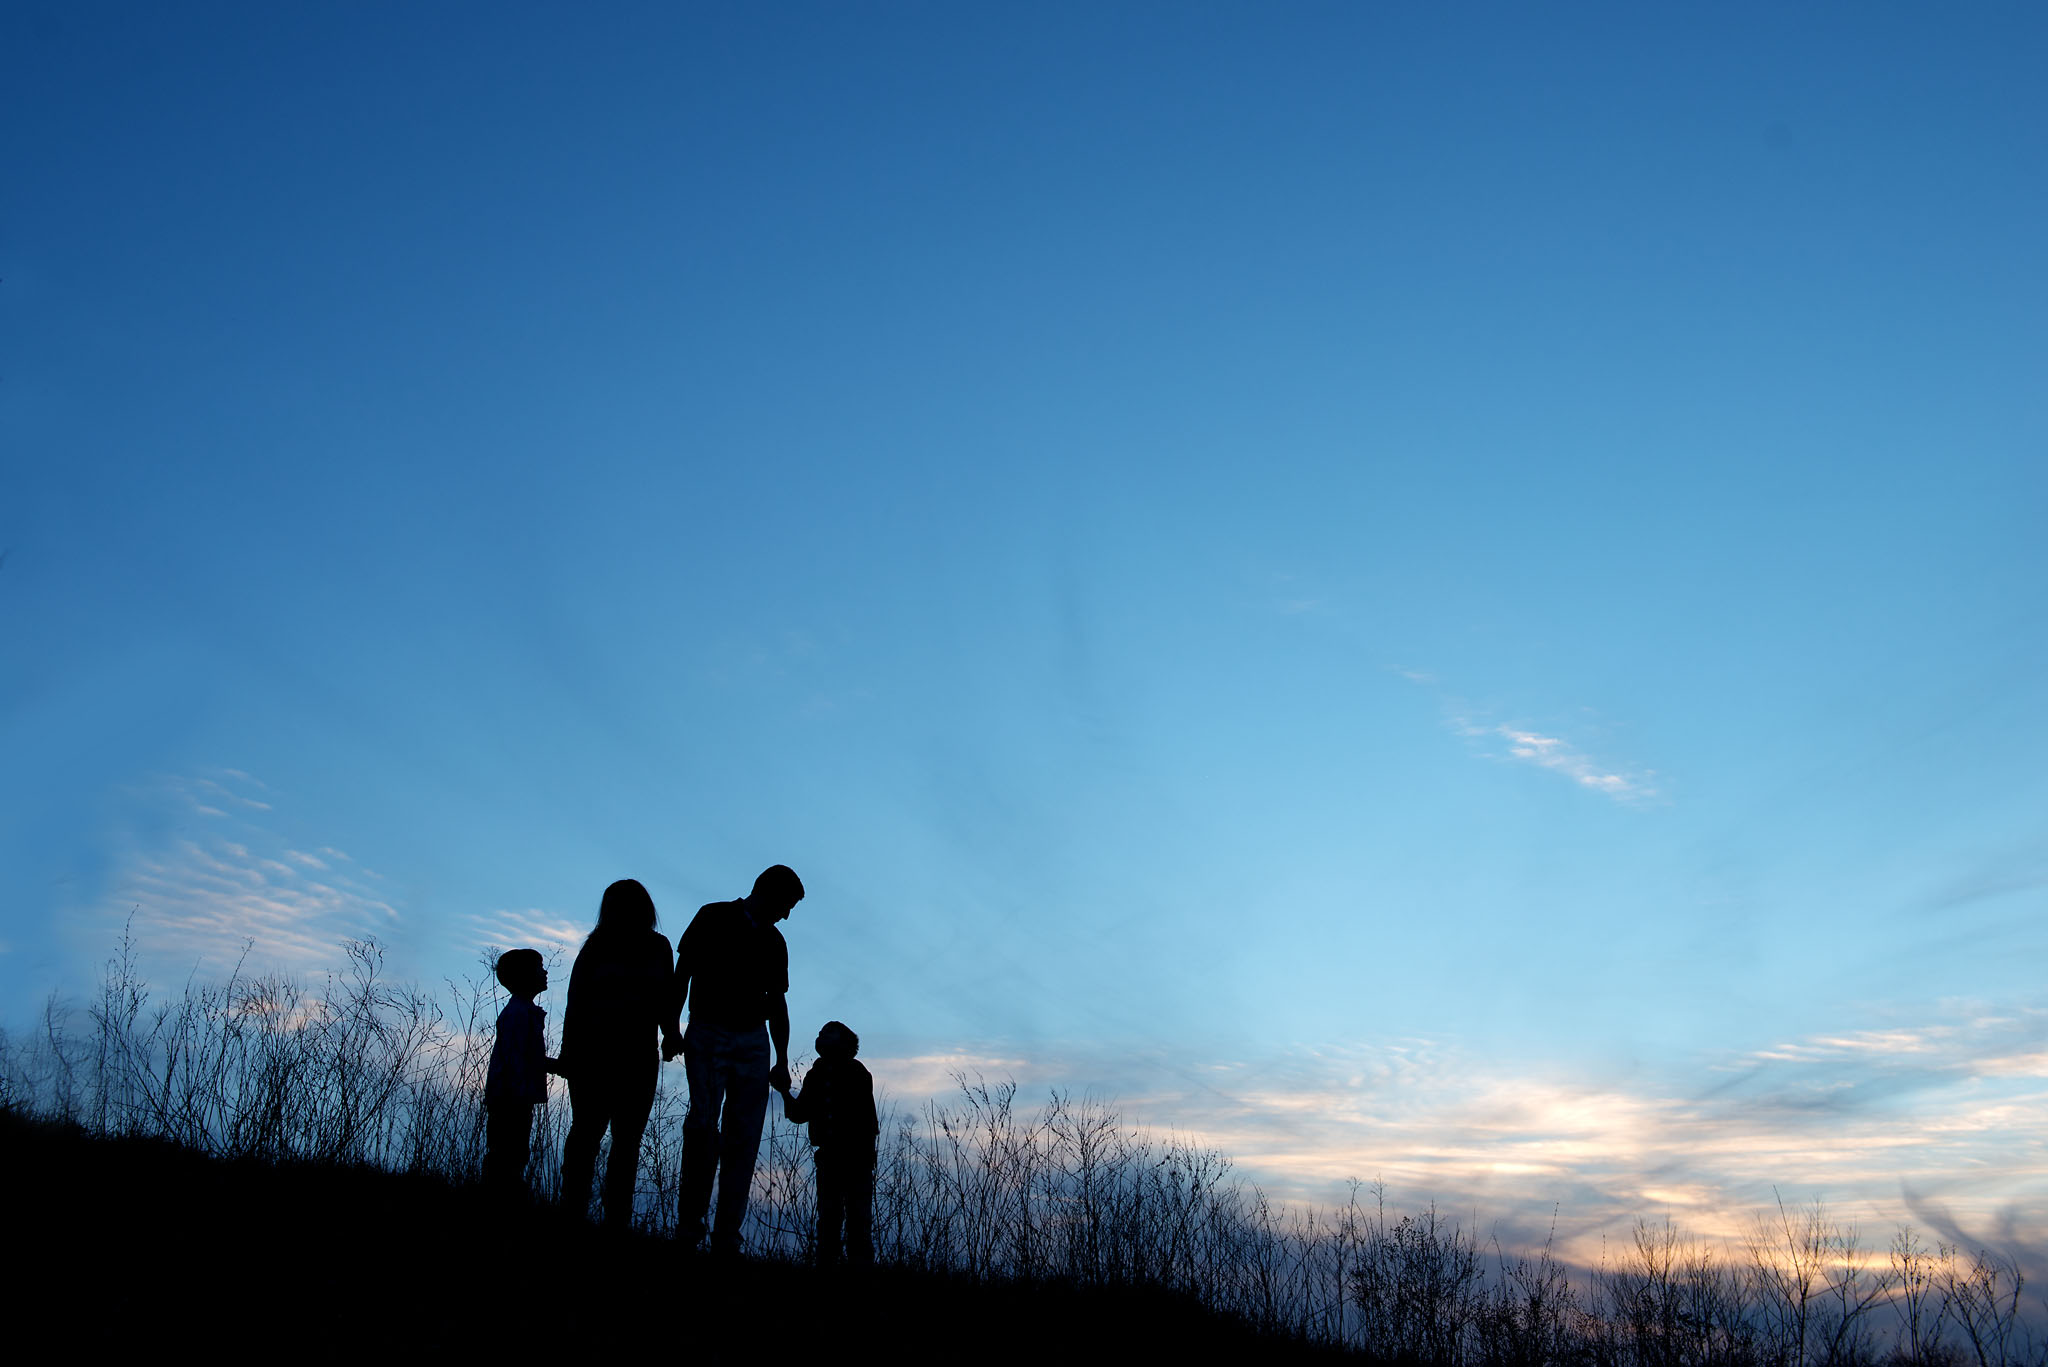 family silhouette at sunset